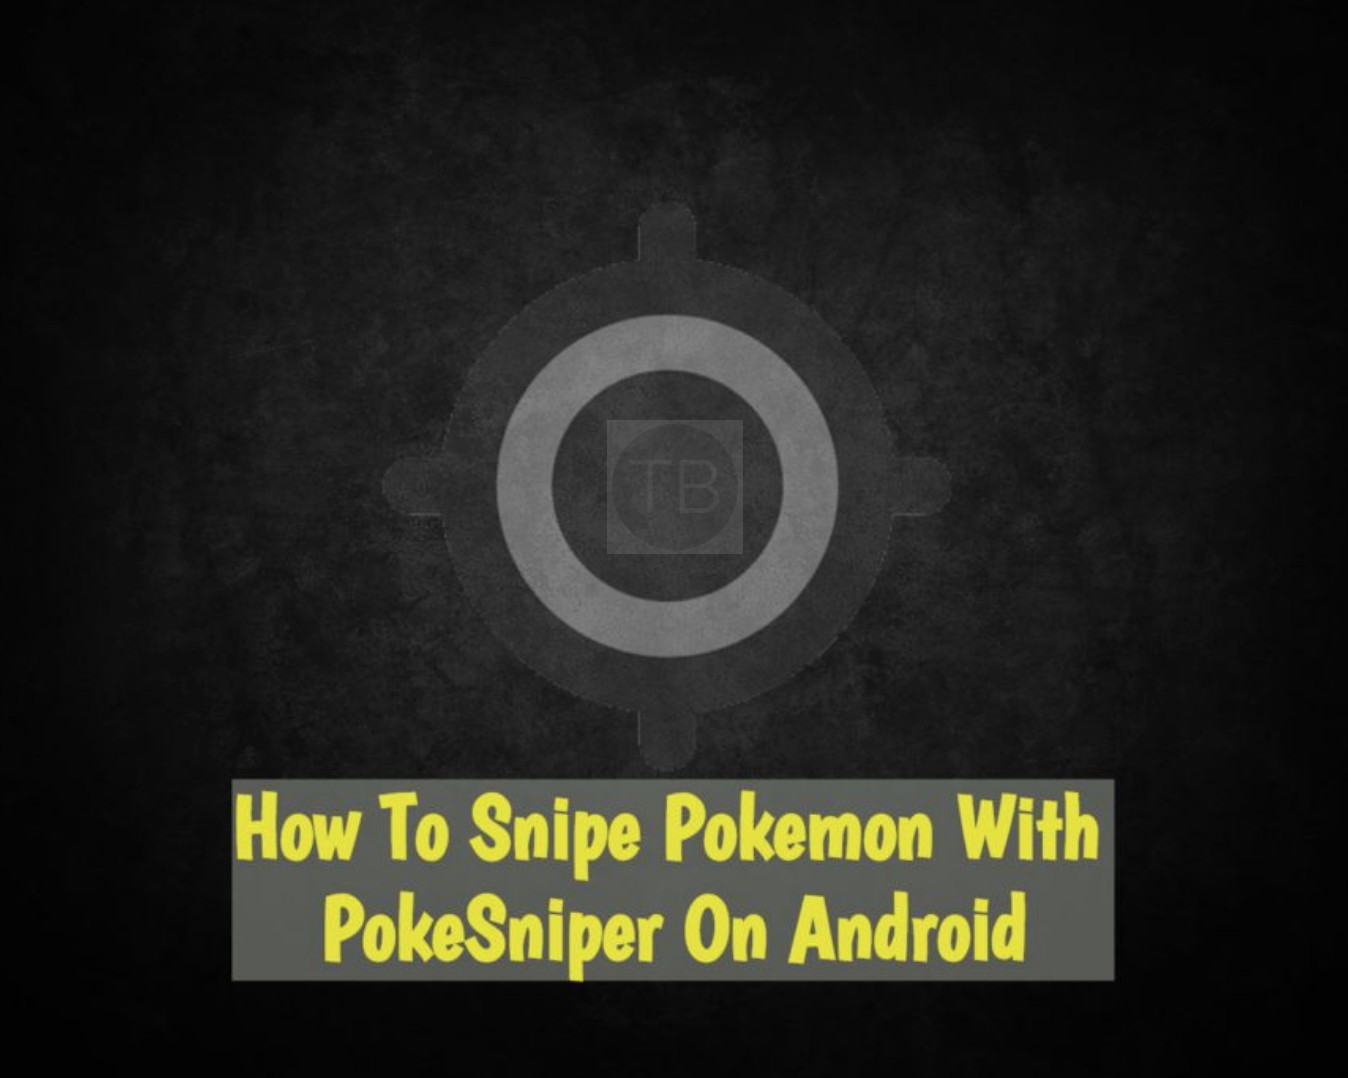 PokeSniper On Android